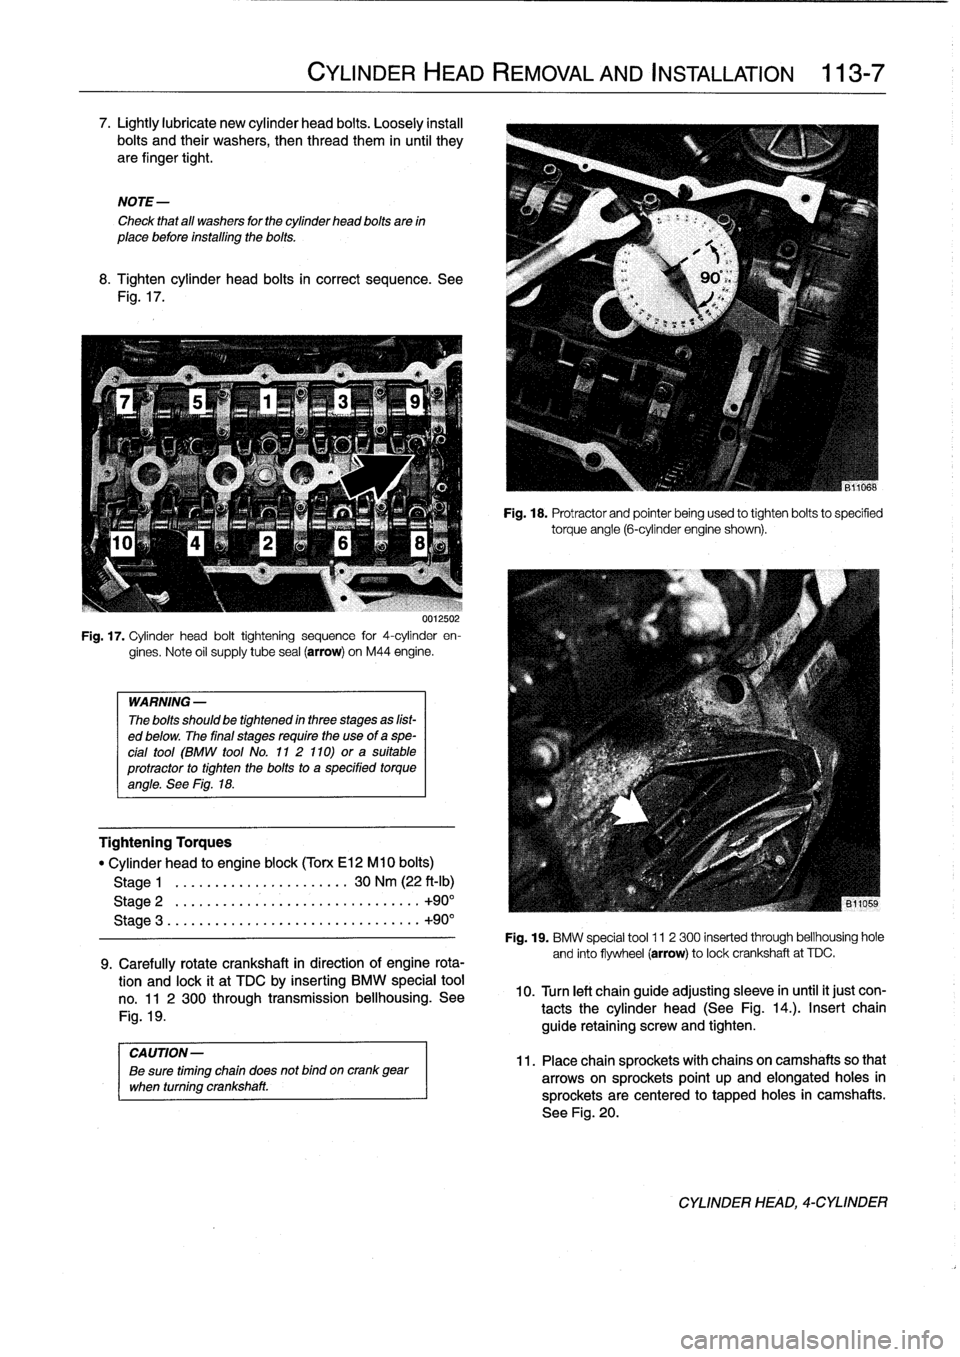 BMW M3 1993 E36 User Guide 
7
.
Lightly
lubricate
new
cylinder
head
bolts
.
Loosely
instan
bolts
and
their
washers,
then
thread
them
in
until
they
are
finger
tight
.

NOTE-

Check
that
all
washers
for
the
cylinder
head
bolts
ar